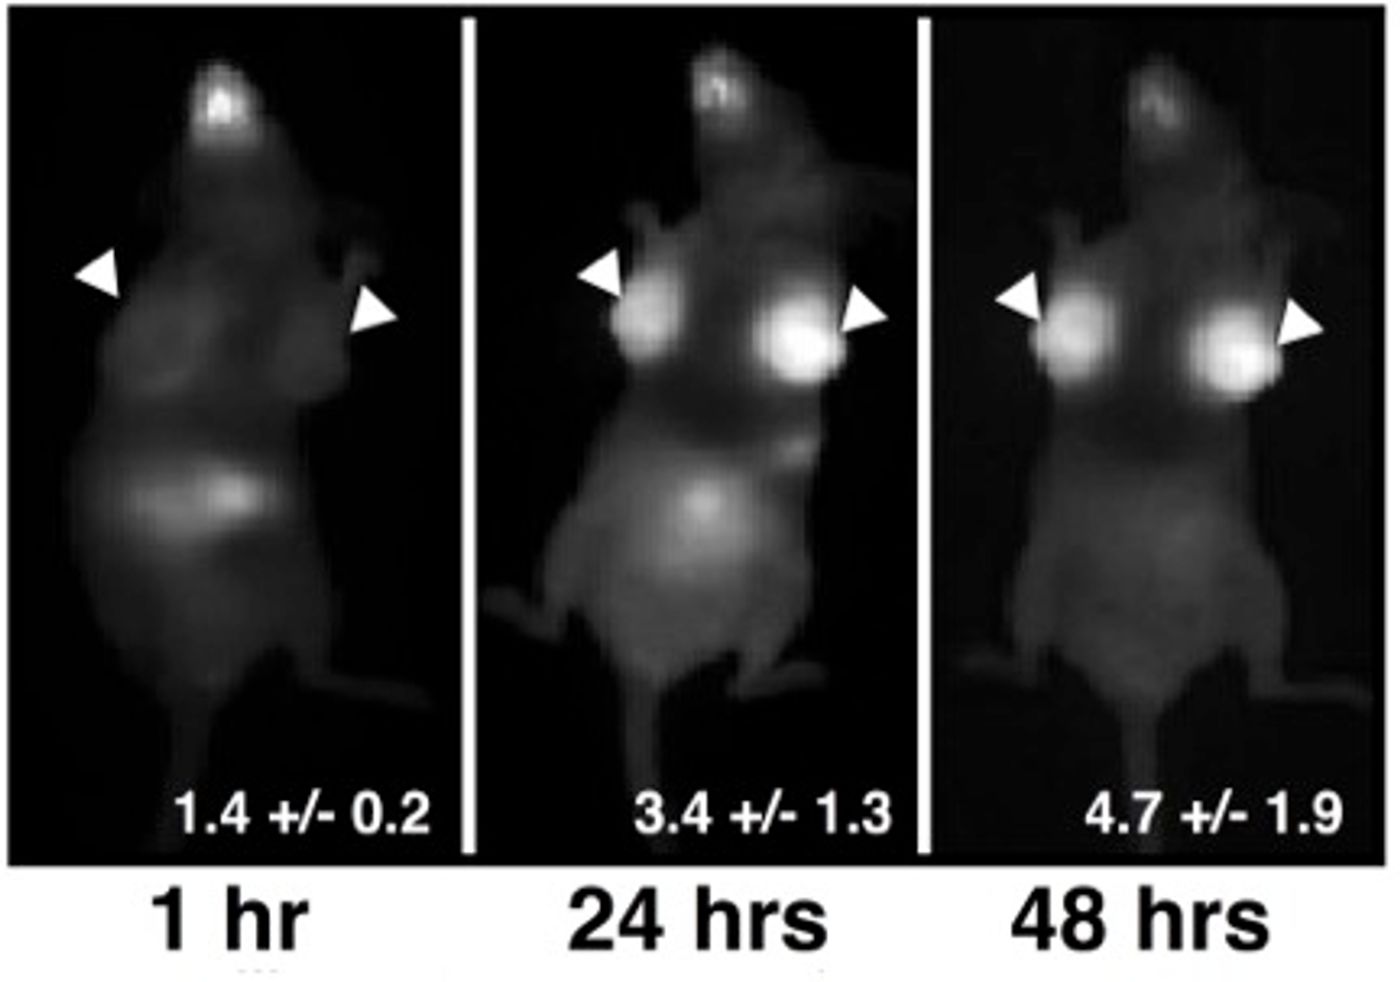 Breast cancer tumors light up with infrared light